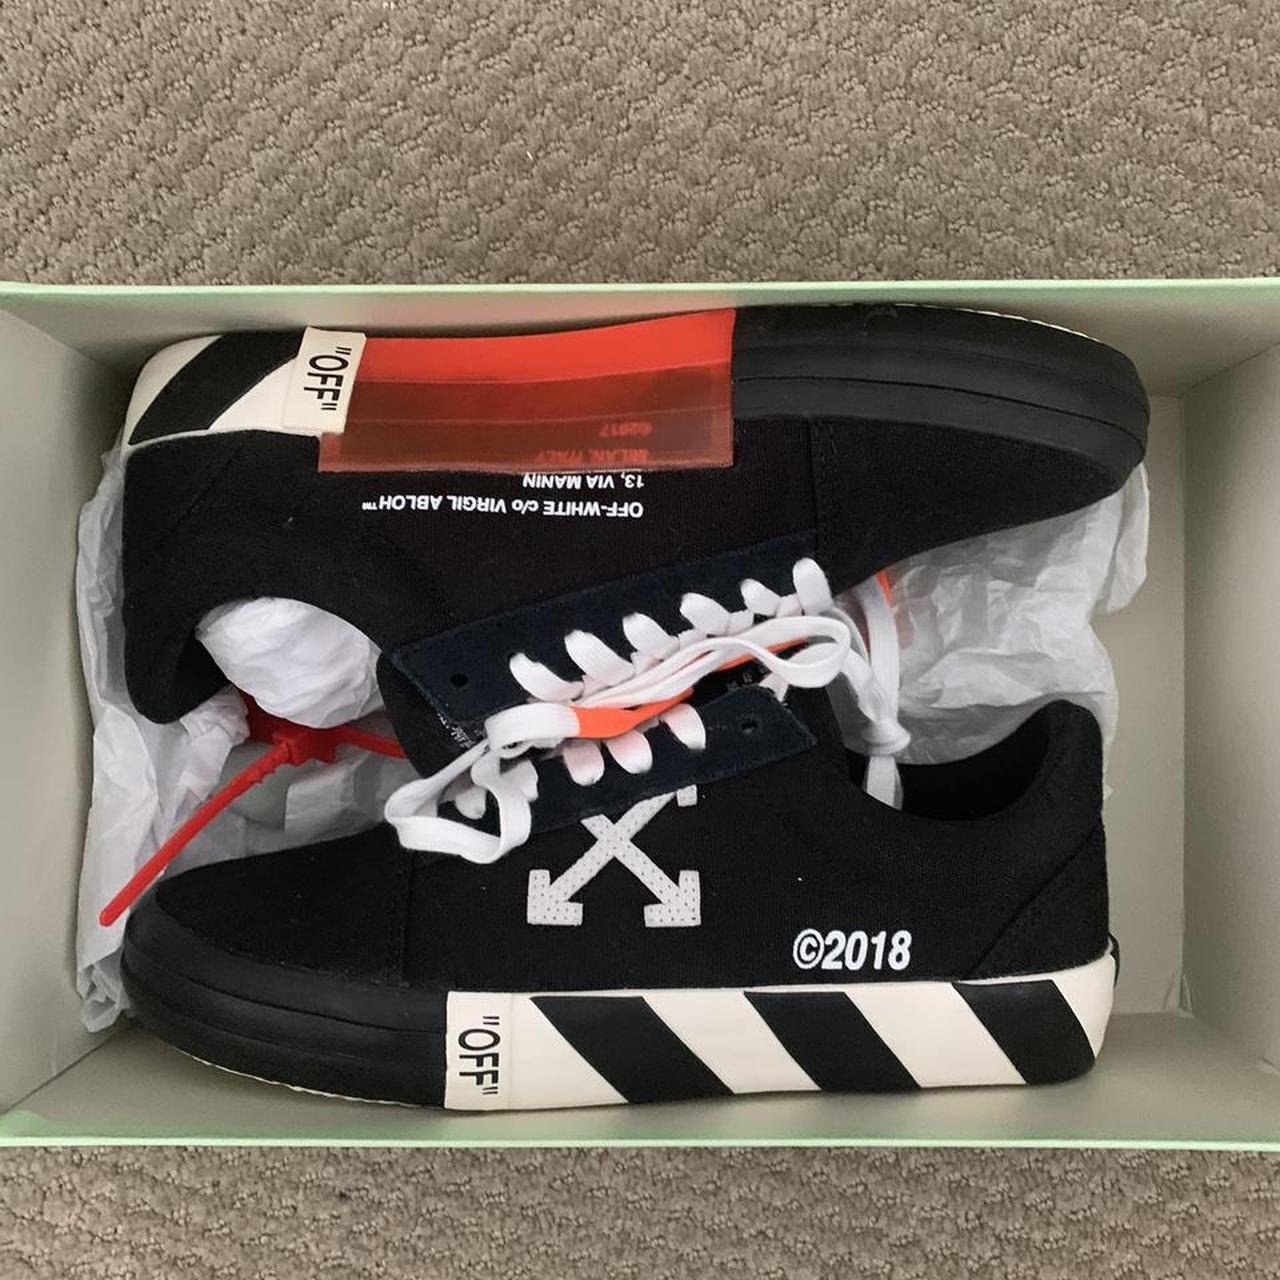 Off-White Women's Vulcanized Low-top Sneakers